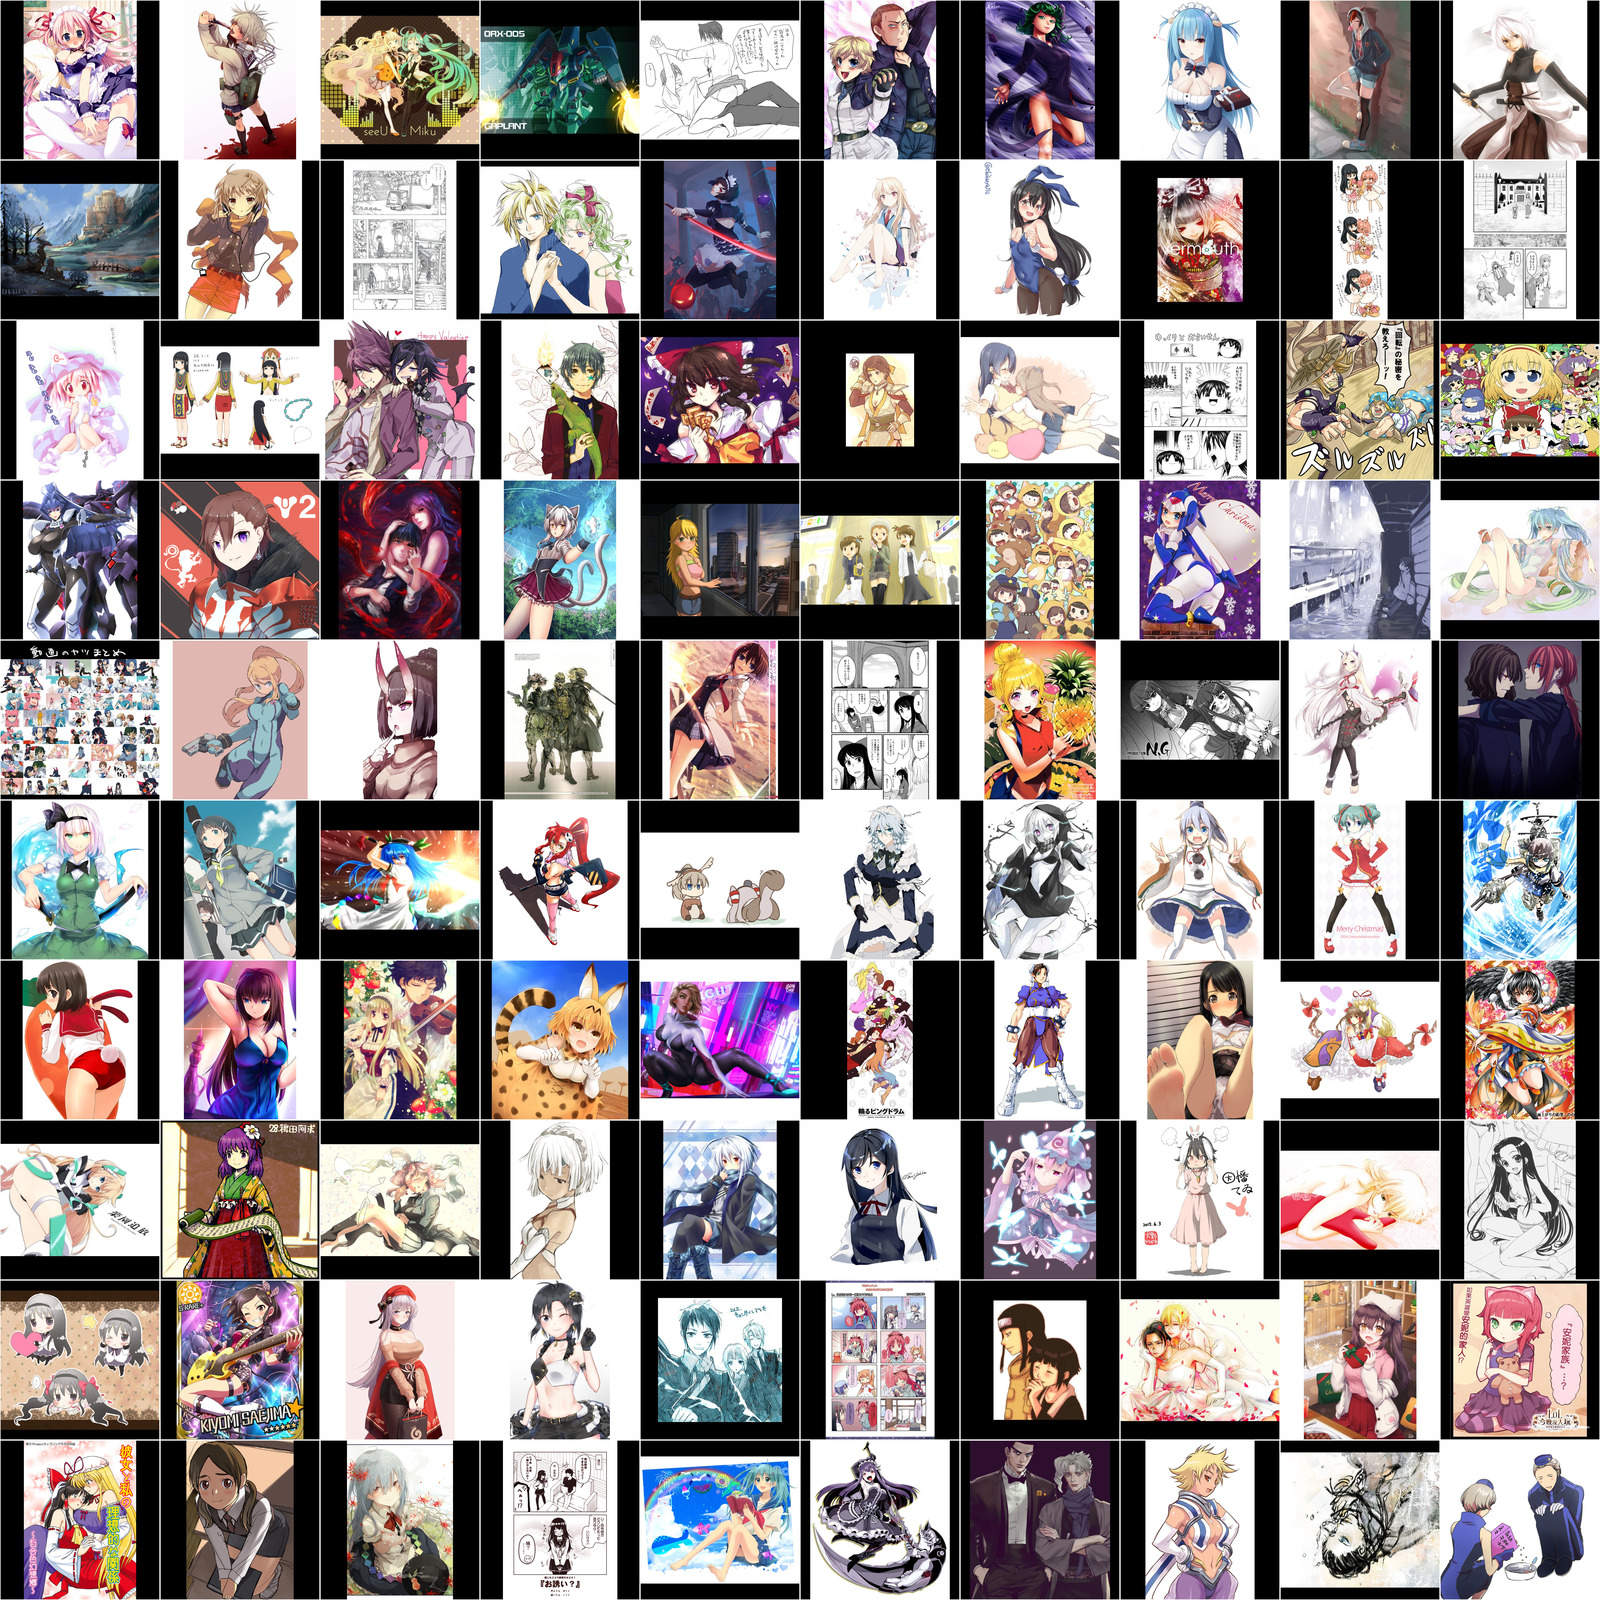 100 random sample images from the 512px SFW subset (‘s’ rating) of Danbooru in a 10×10 grid.